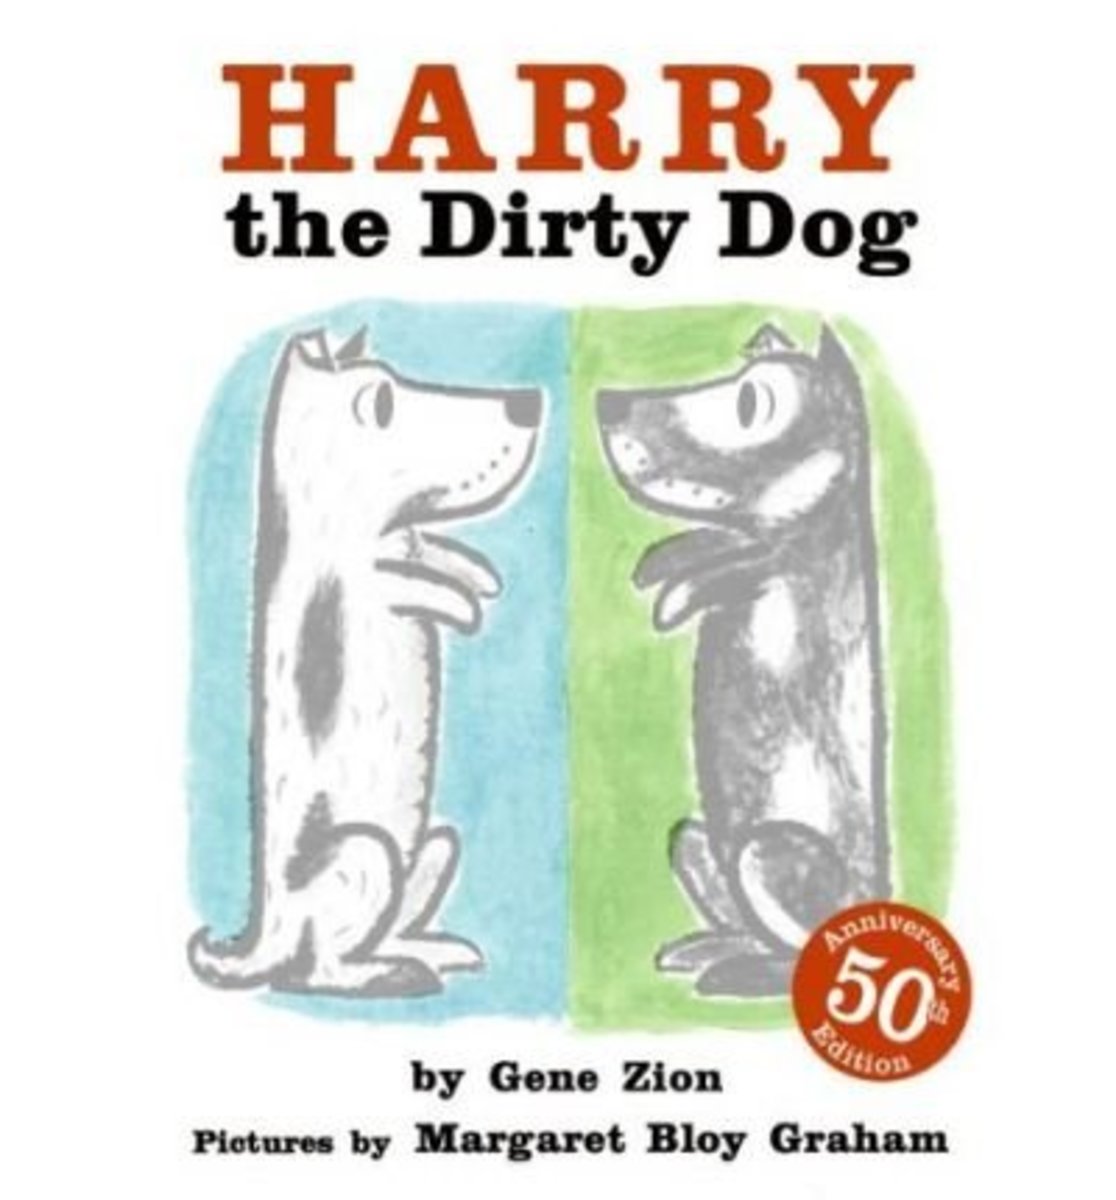 Harry the Dirty Dog by Gene Zion and Margaret Bloy Graham